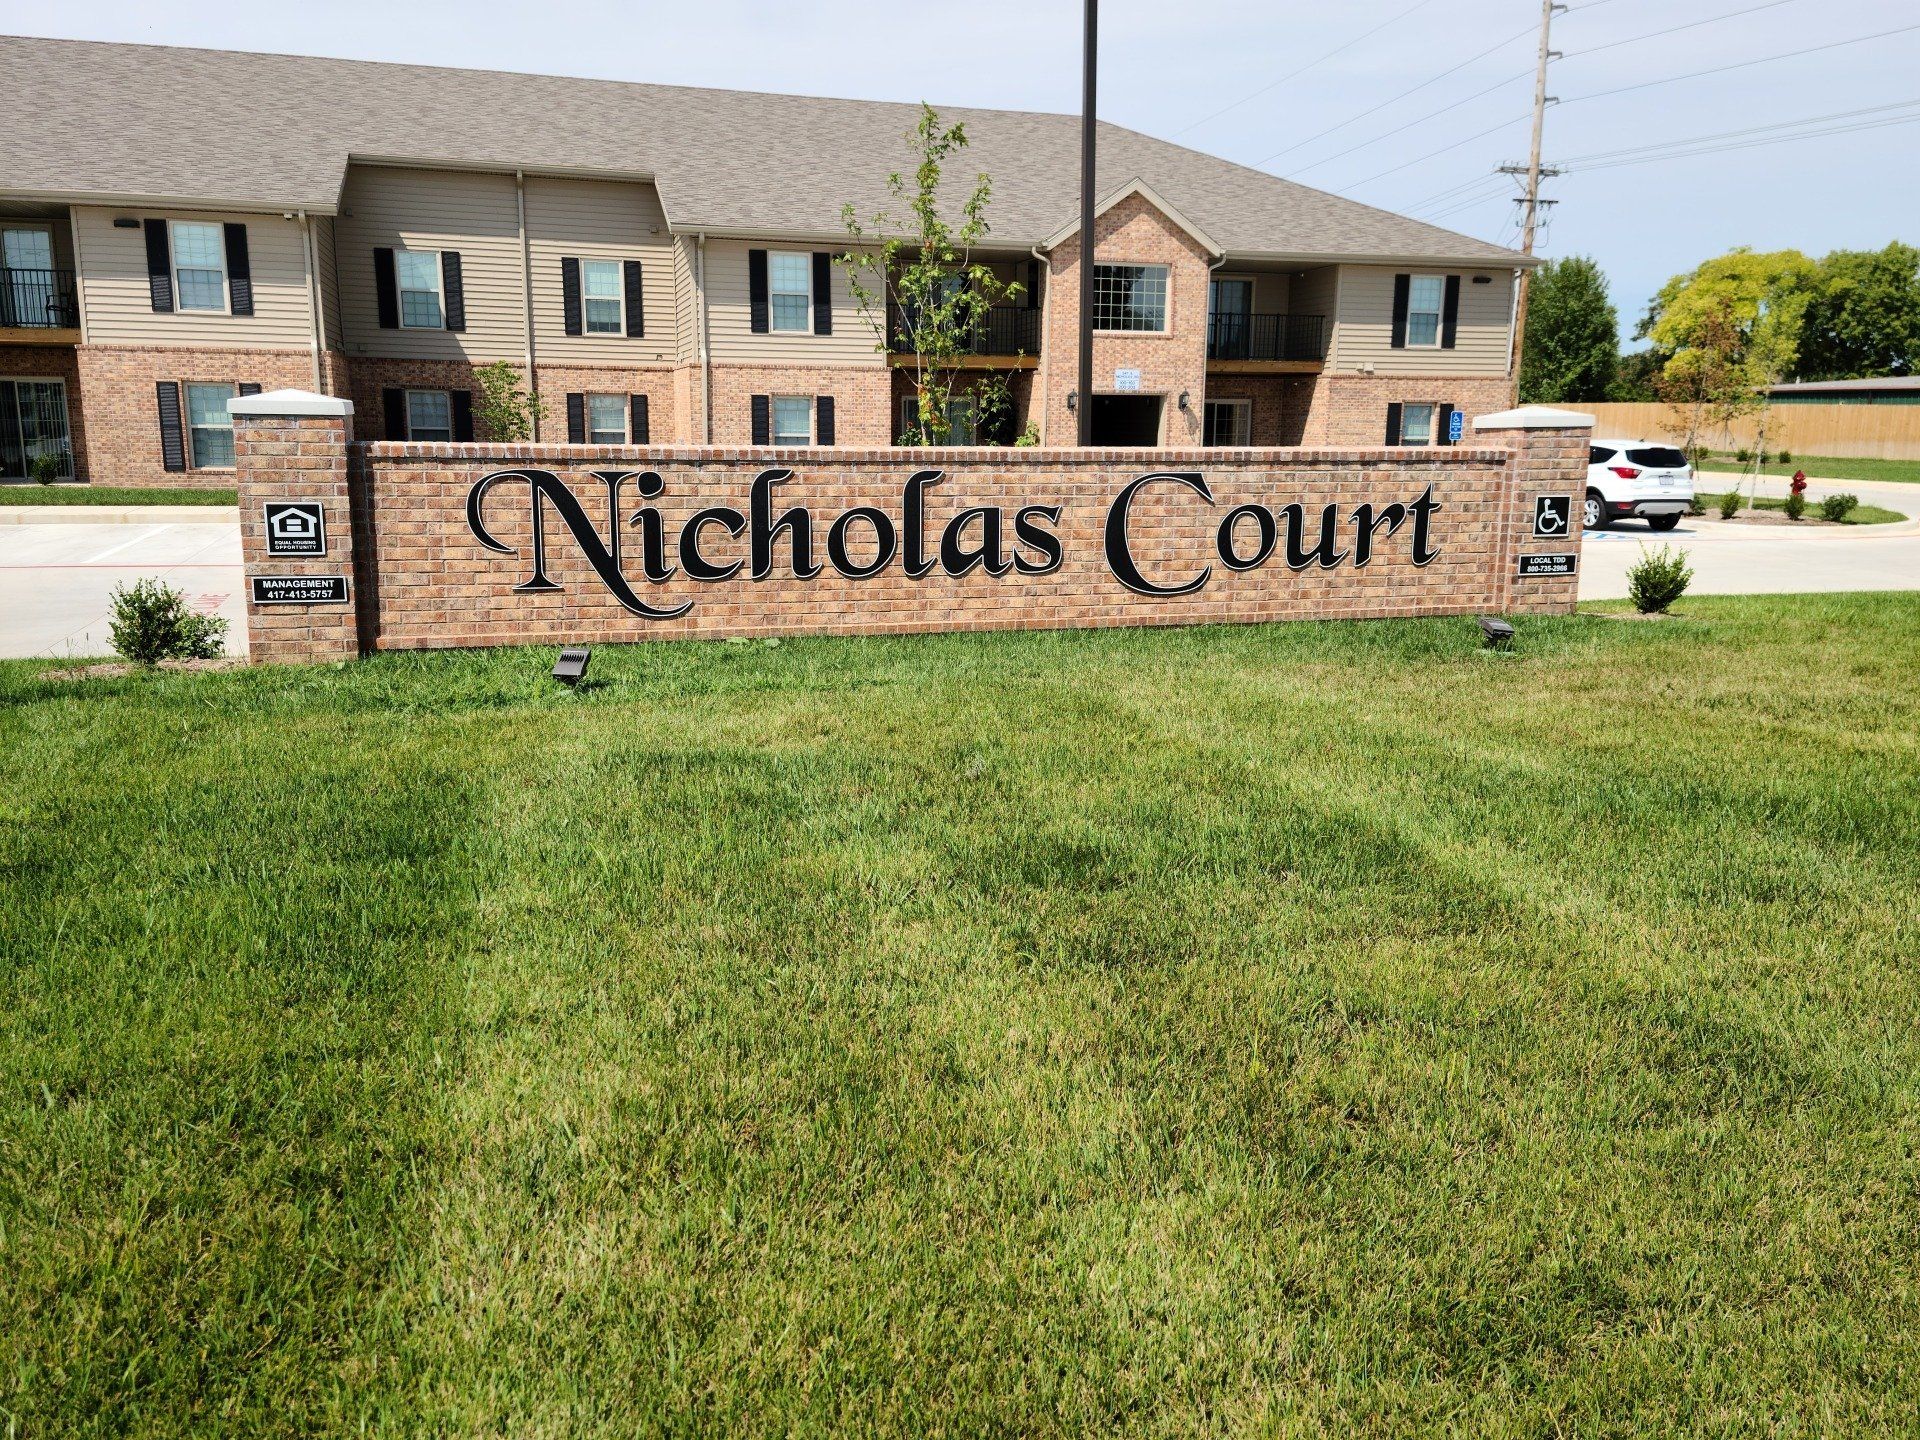 Nicholas Court Apartments Image Coming Soon